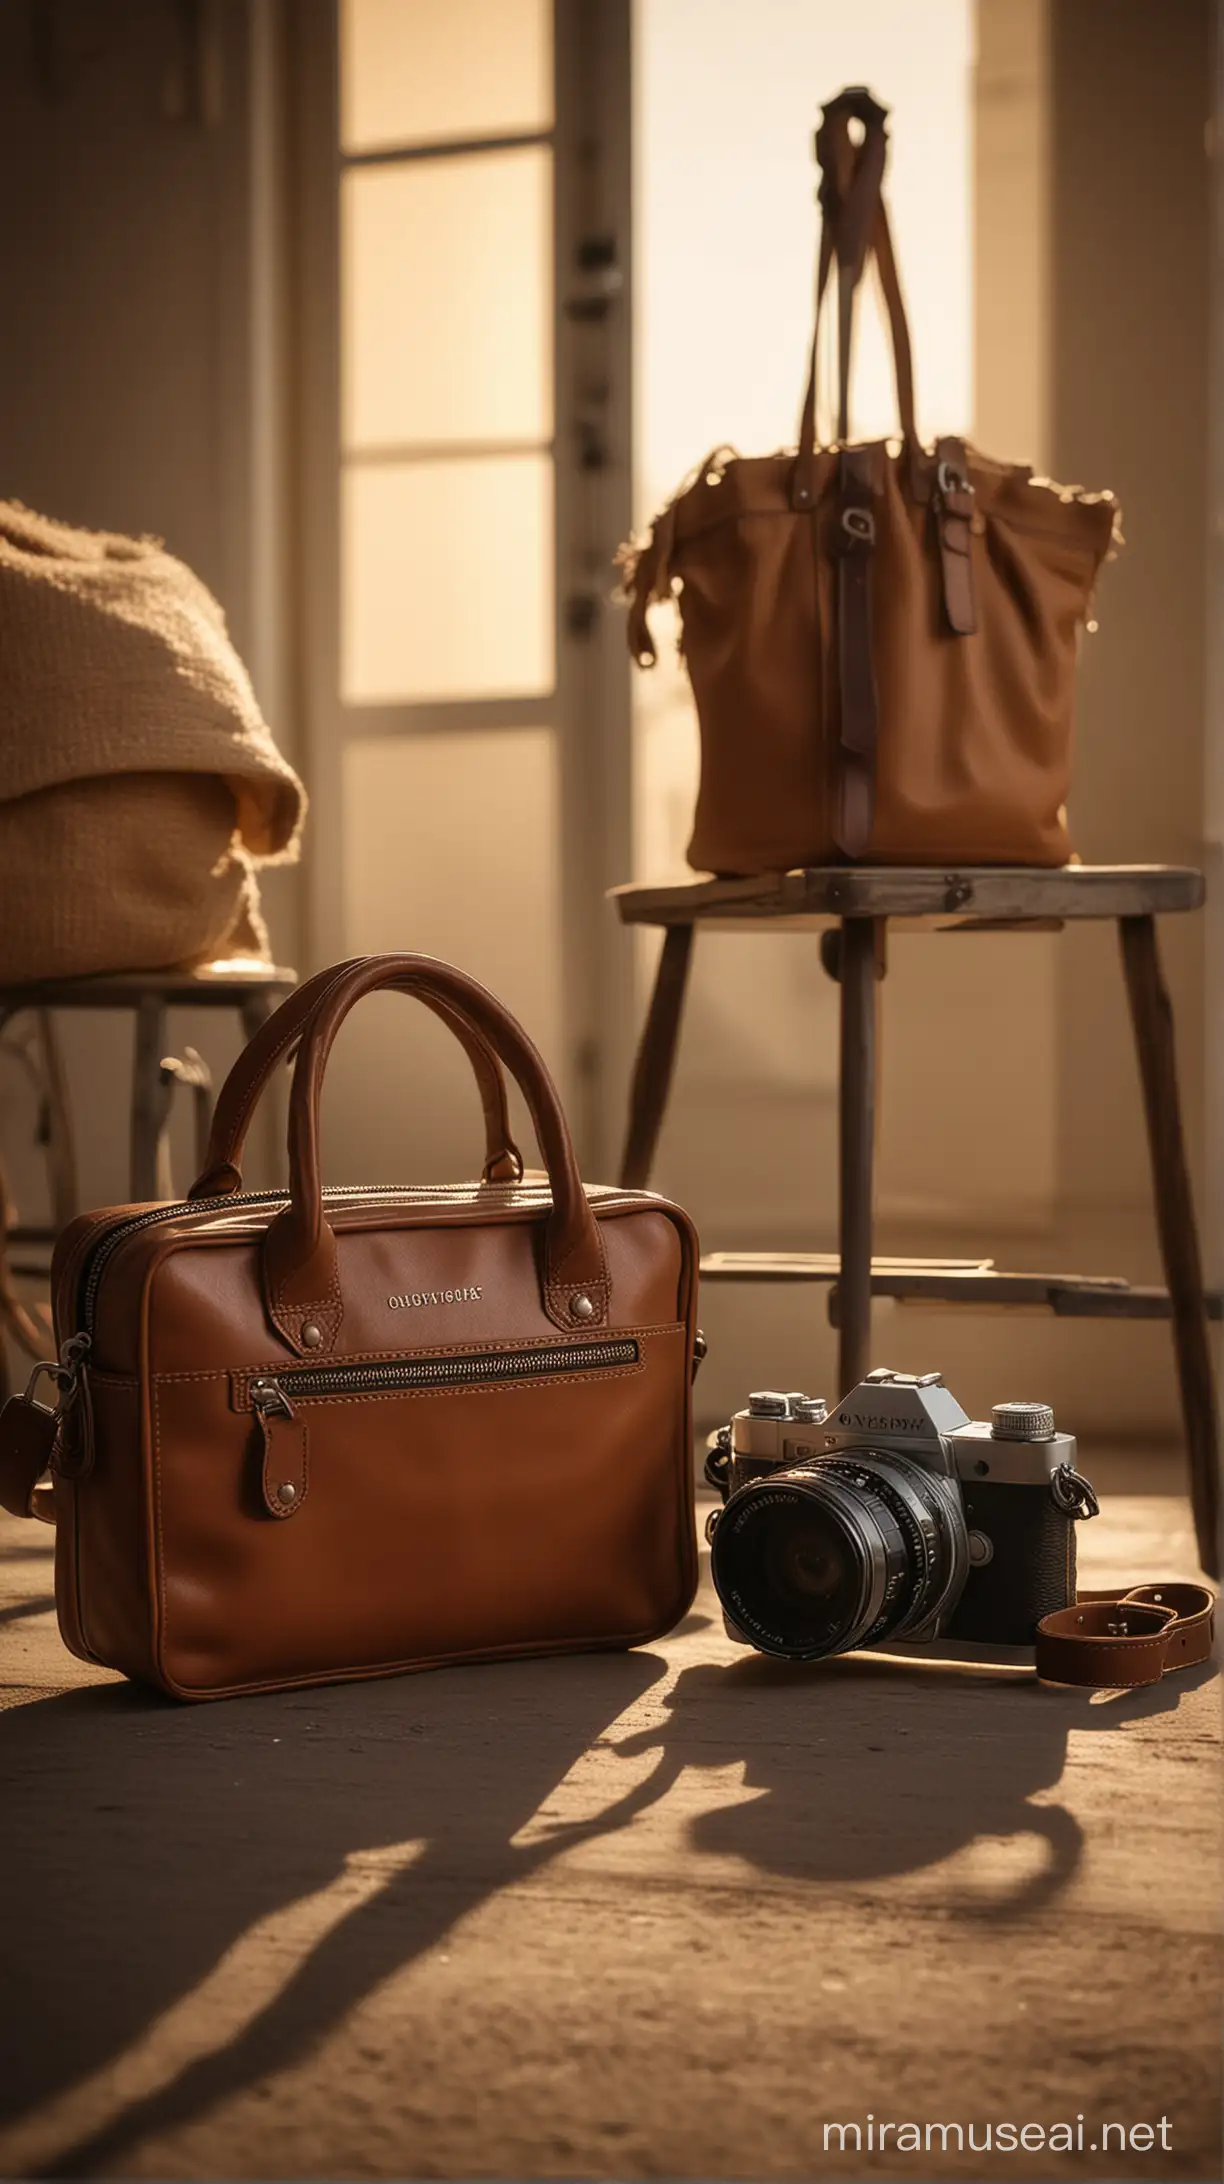 Nadyva's allure: Gender-neutral bags, stylish eyewear, artisanal baby toys. Industrial-chic setting. Evening glow. Vintage camera, wide-angle lens. Dramatic shadows, balanced composition